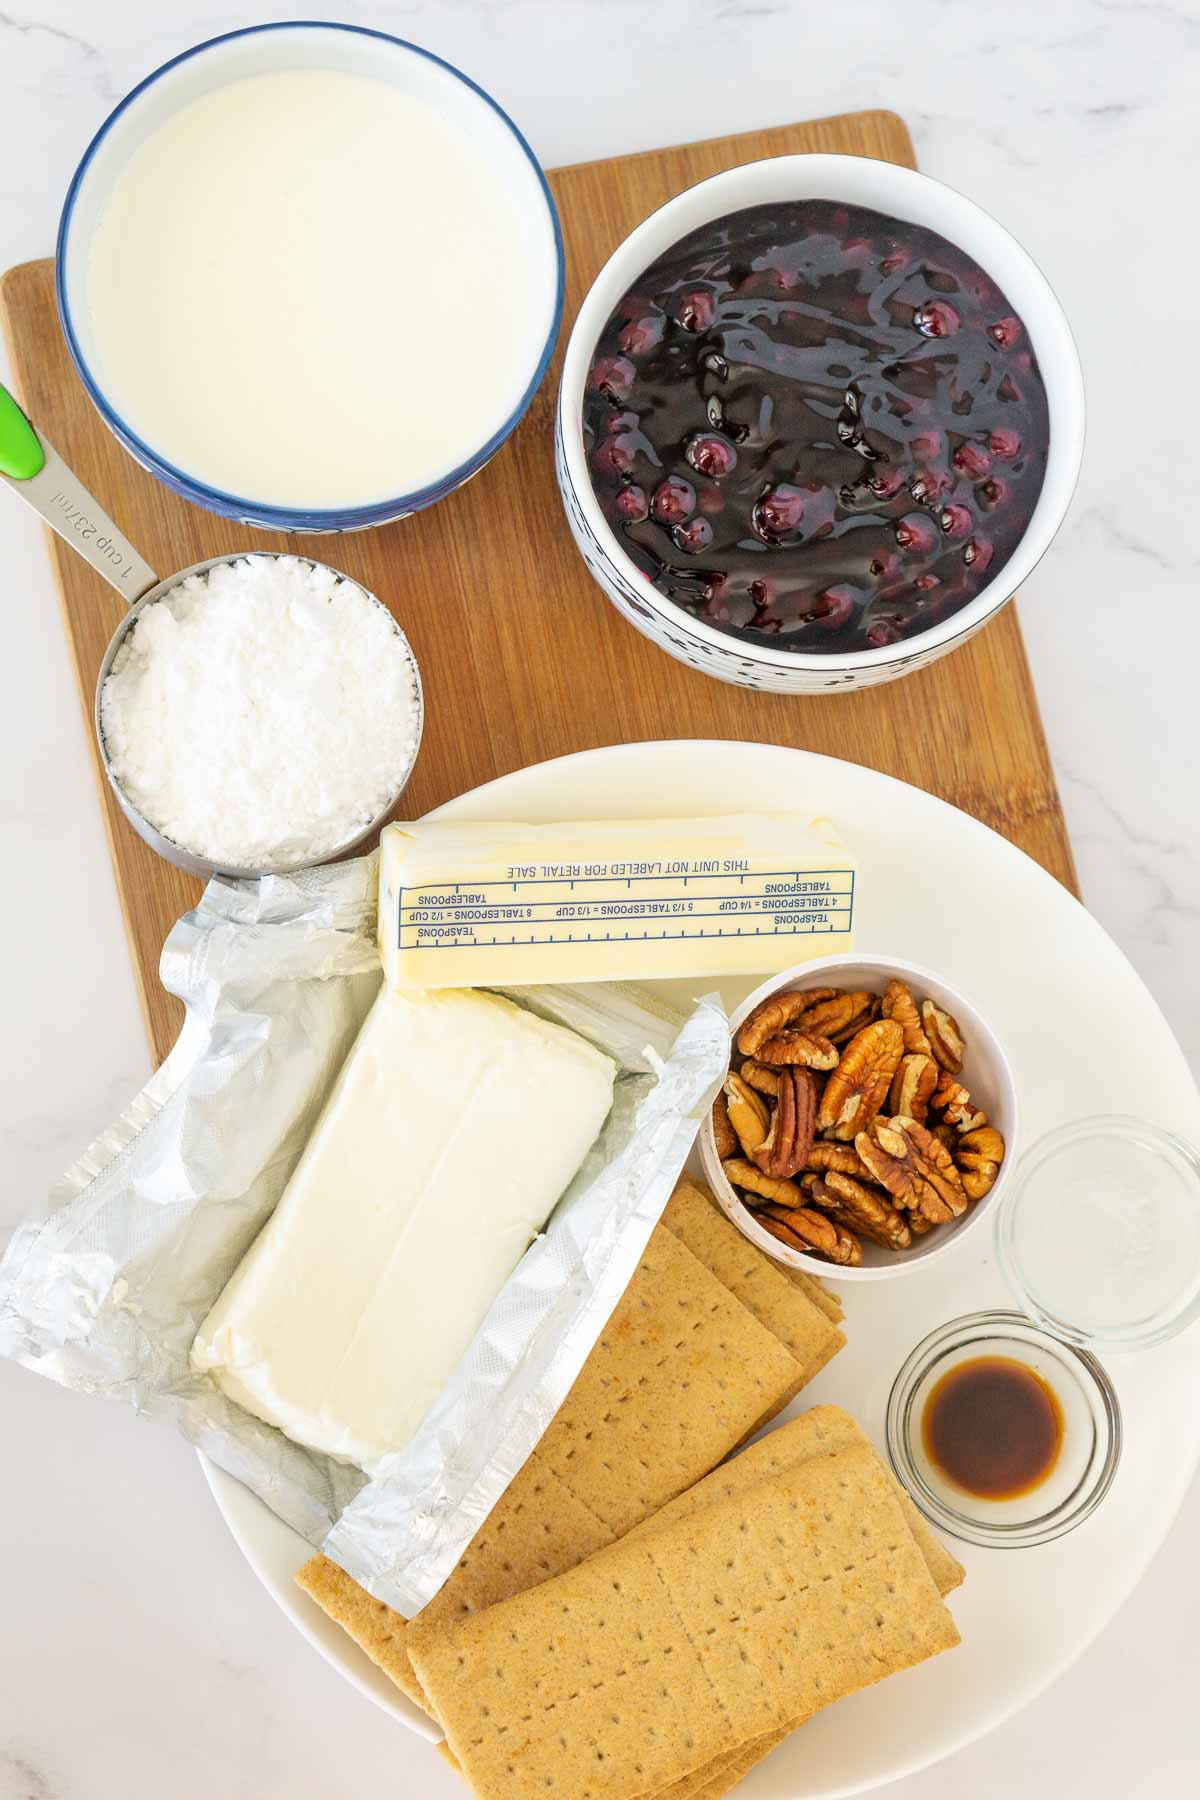 Ingredients to make a no-bake blueberry delight dessert.